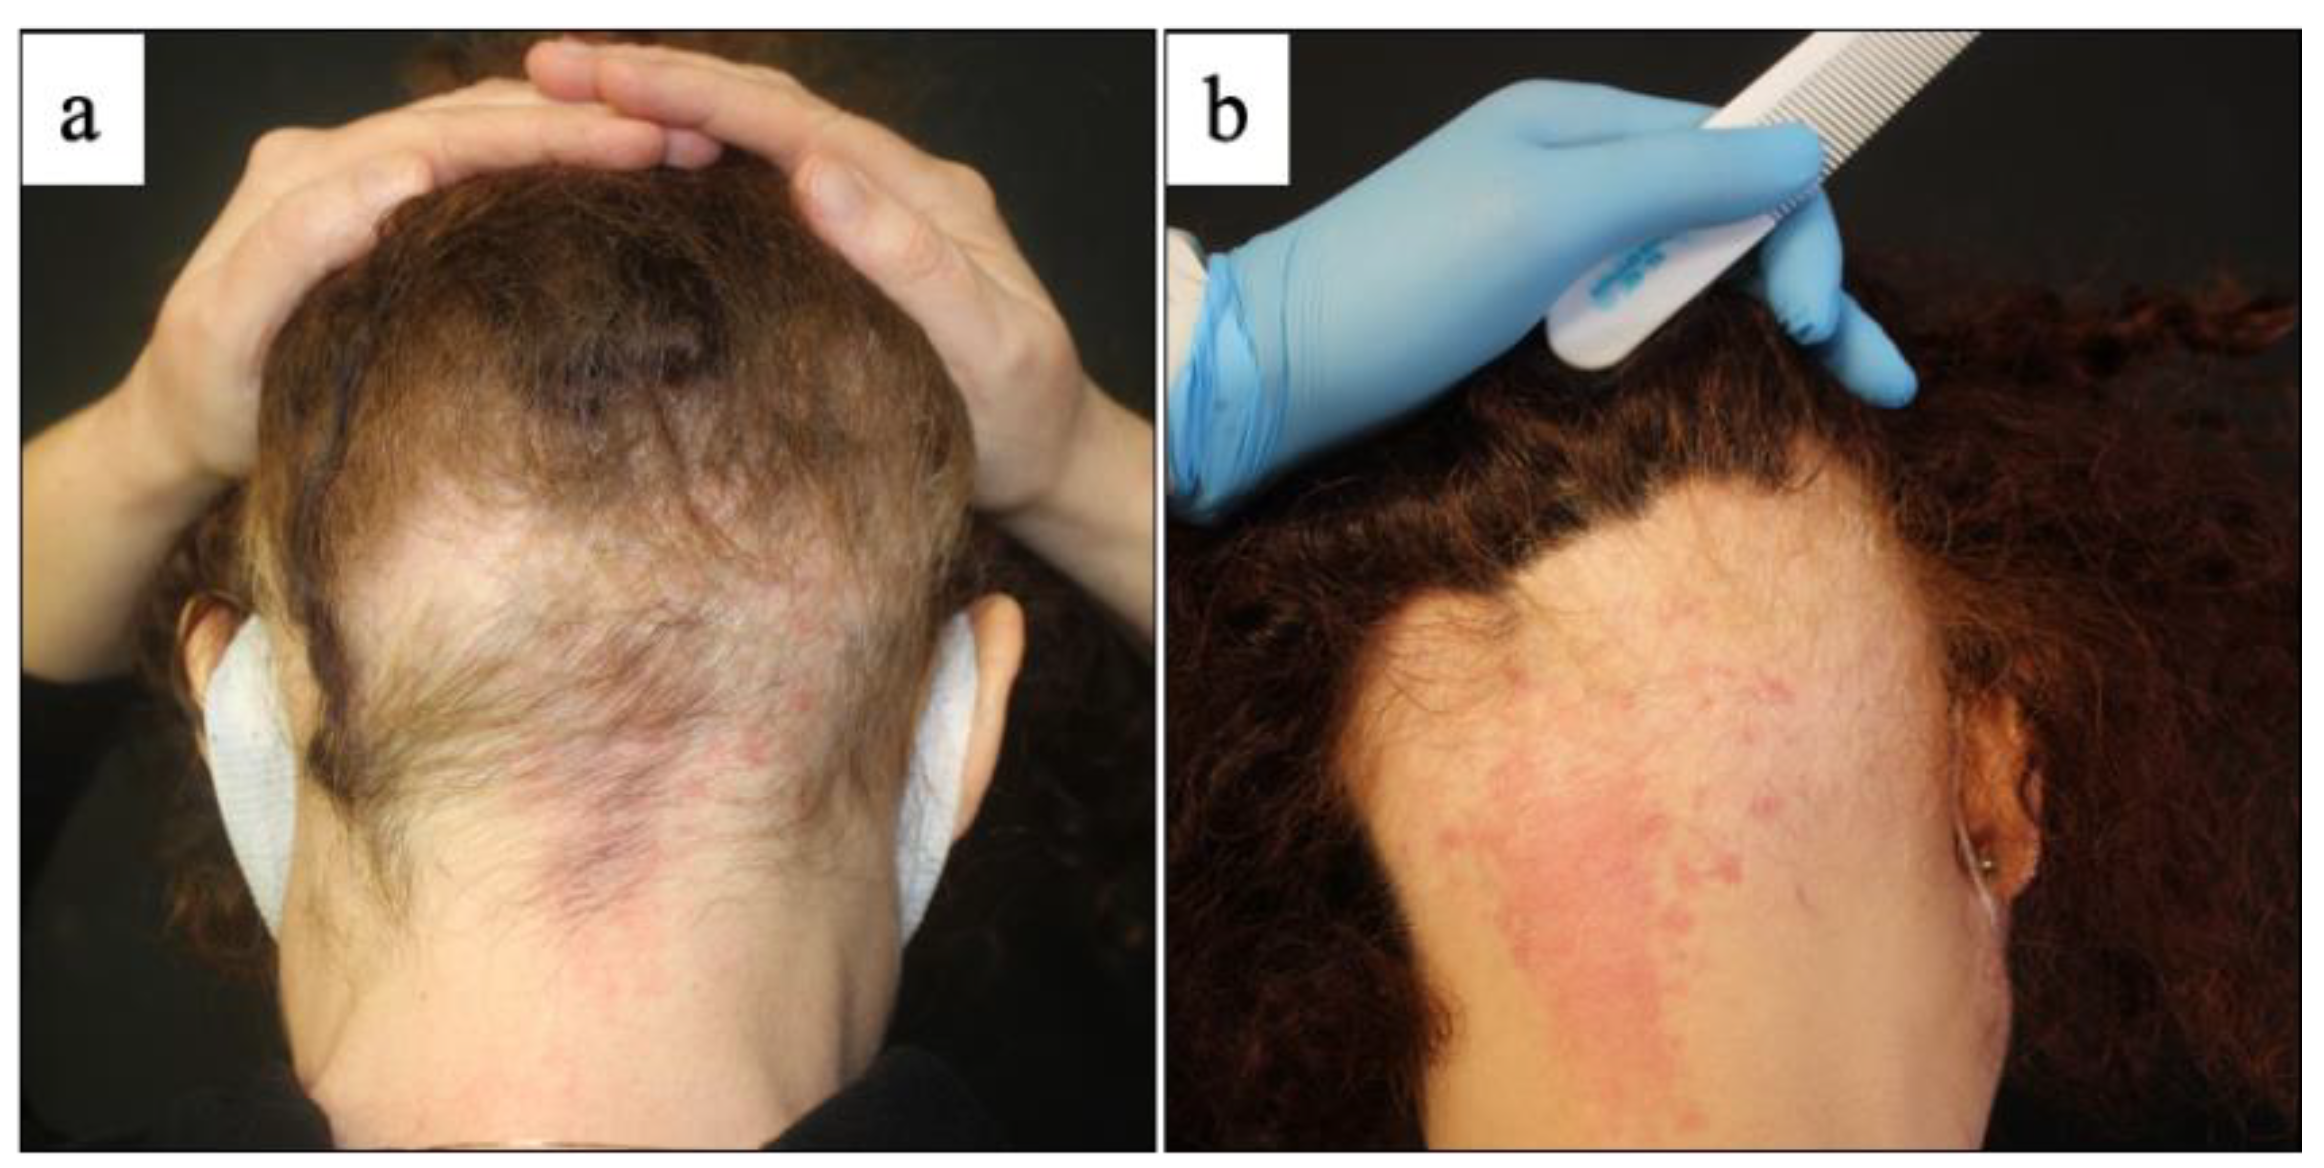 Does Steroids Or Minoxidil Cause Many Side Effects In Alopecia Areata? |  Lybrate